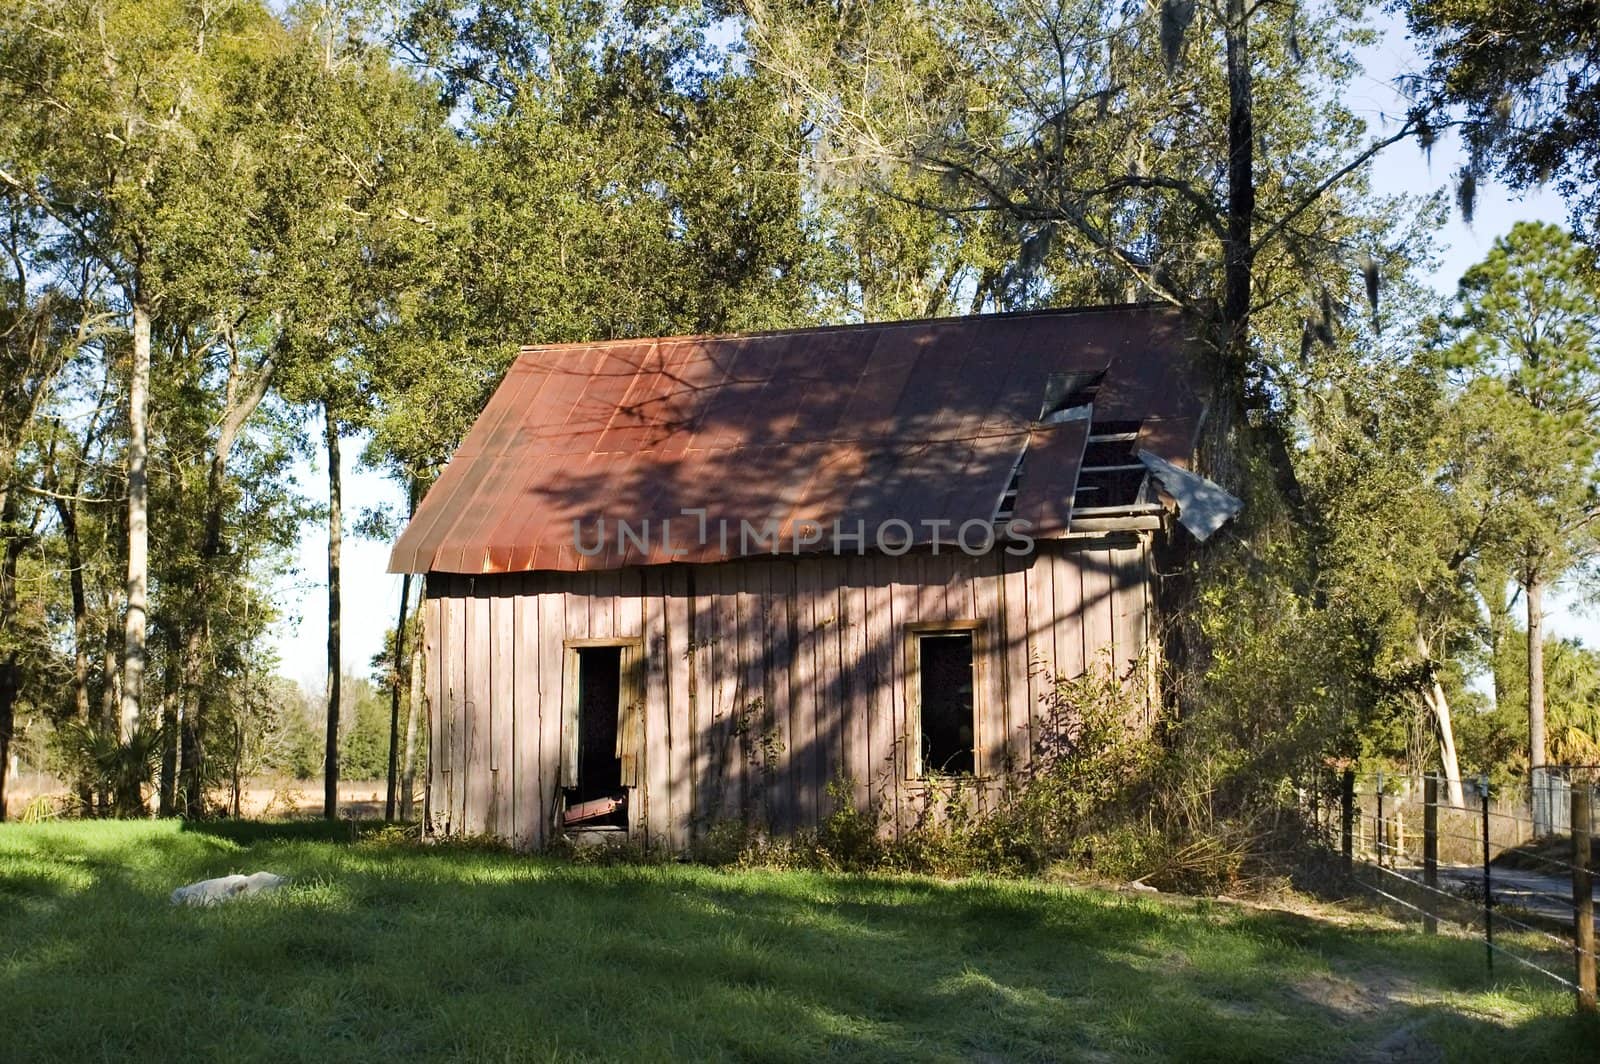 An old shack that was once a church stands abandoned in Florida.